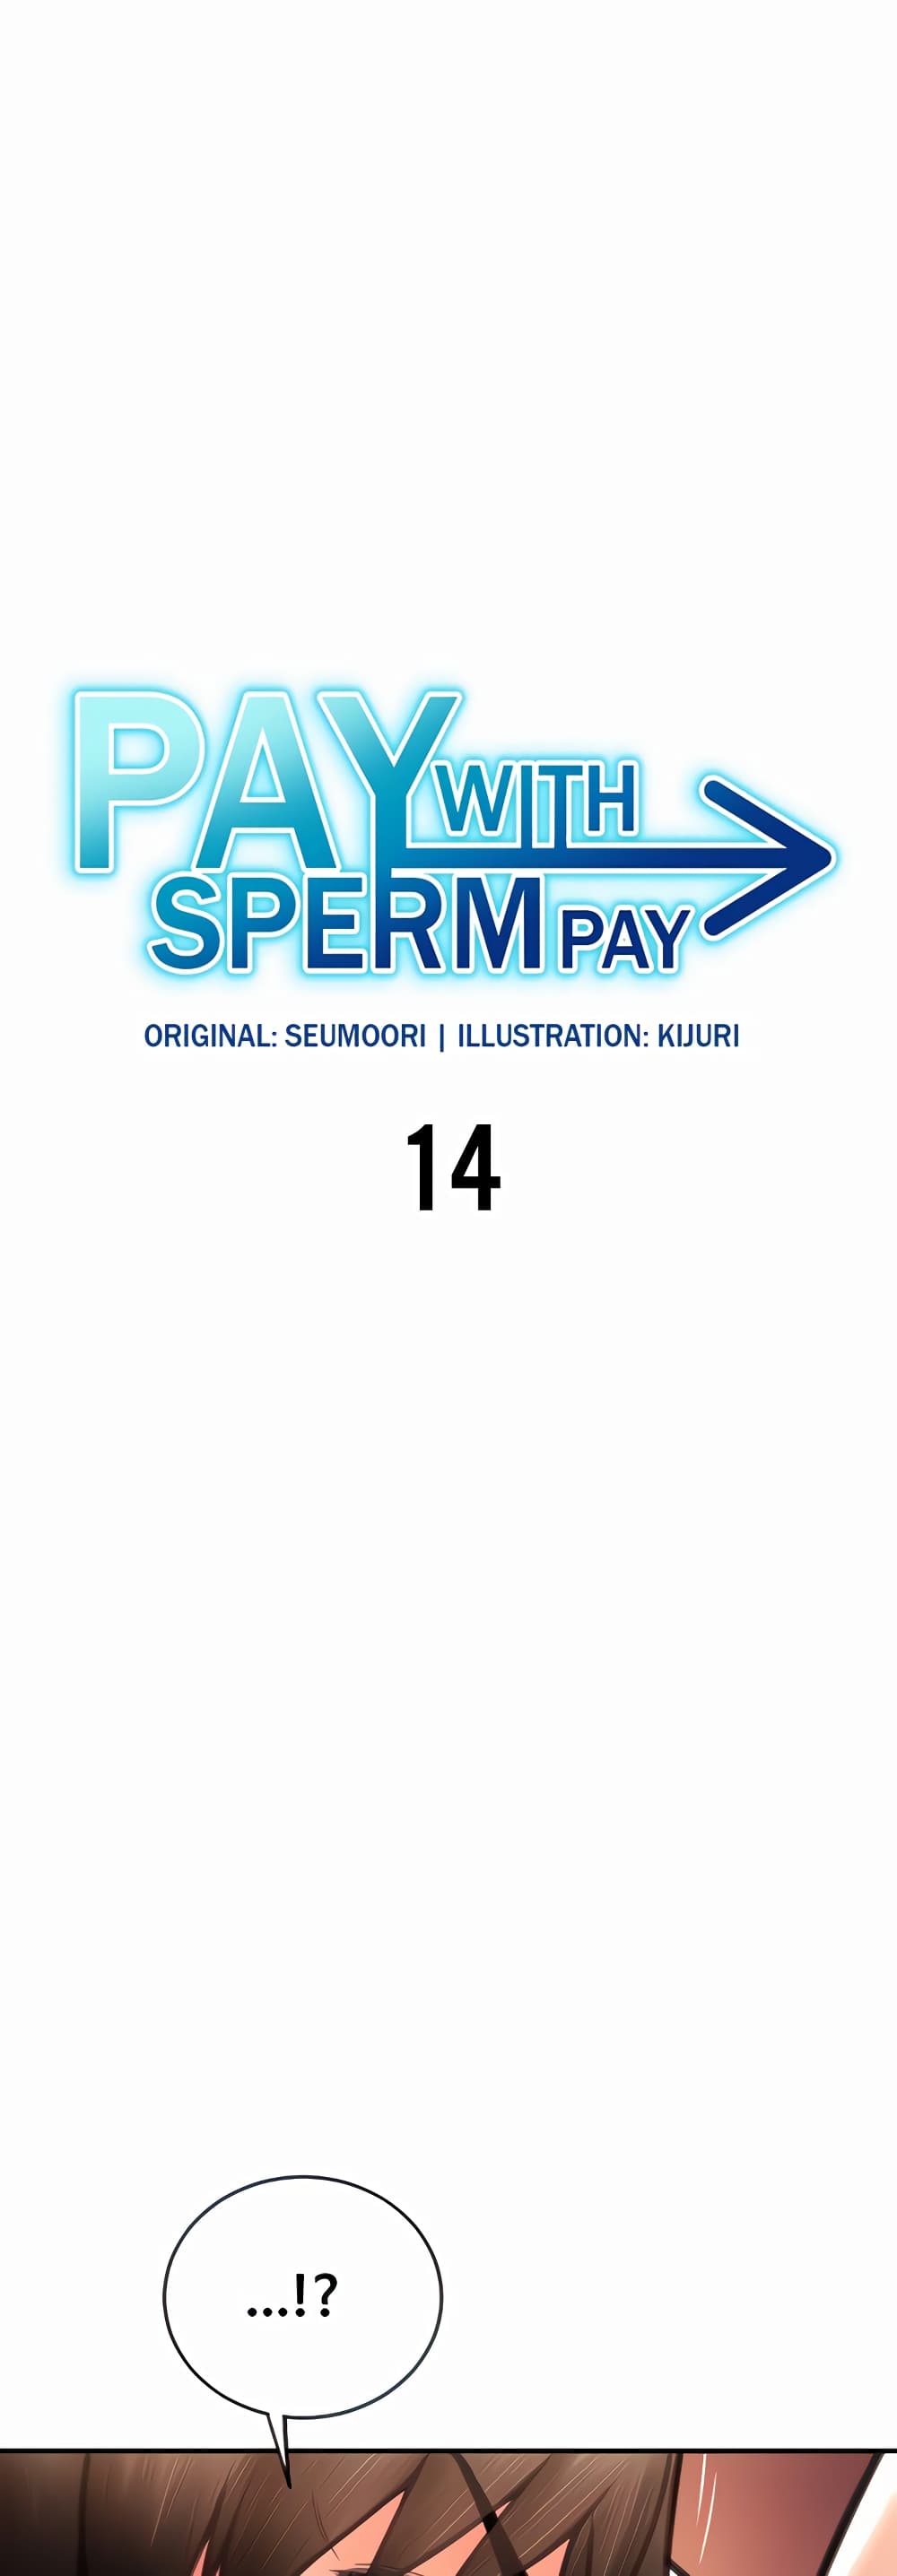 Pay with Sperm Pay 14-14